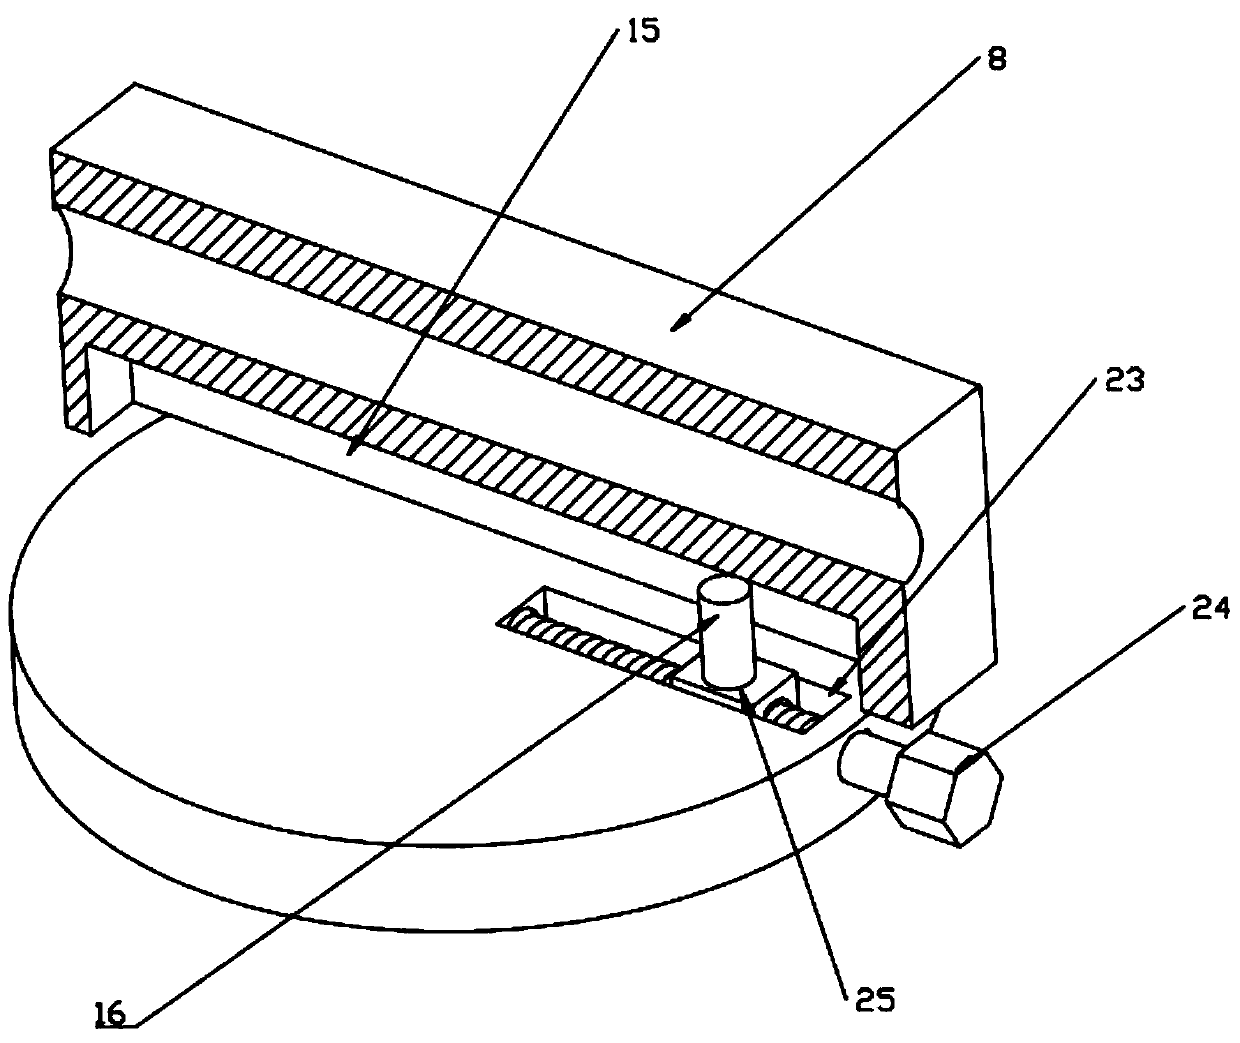 Smoke-eliminating and fire-extinguishing device for fire fighting